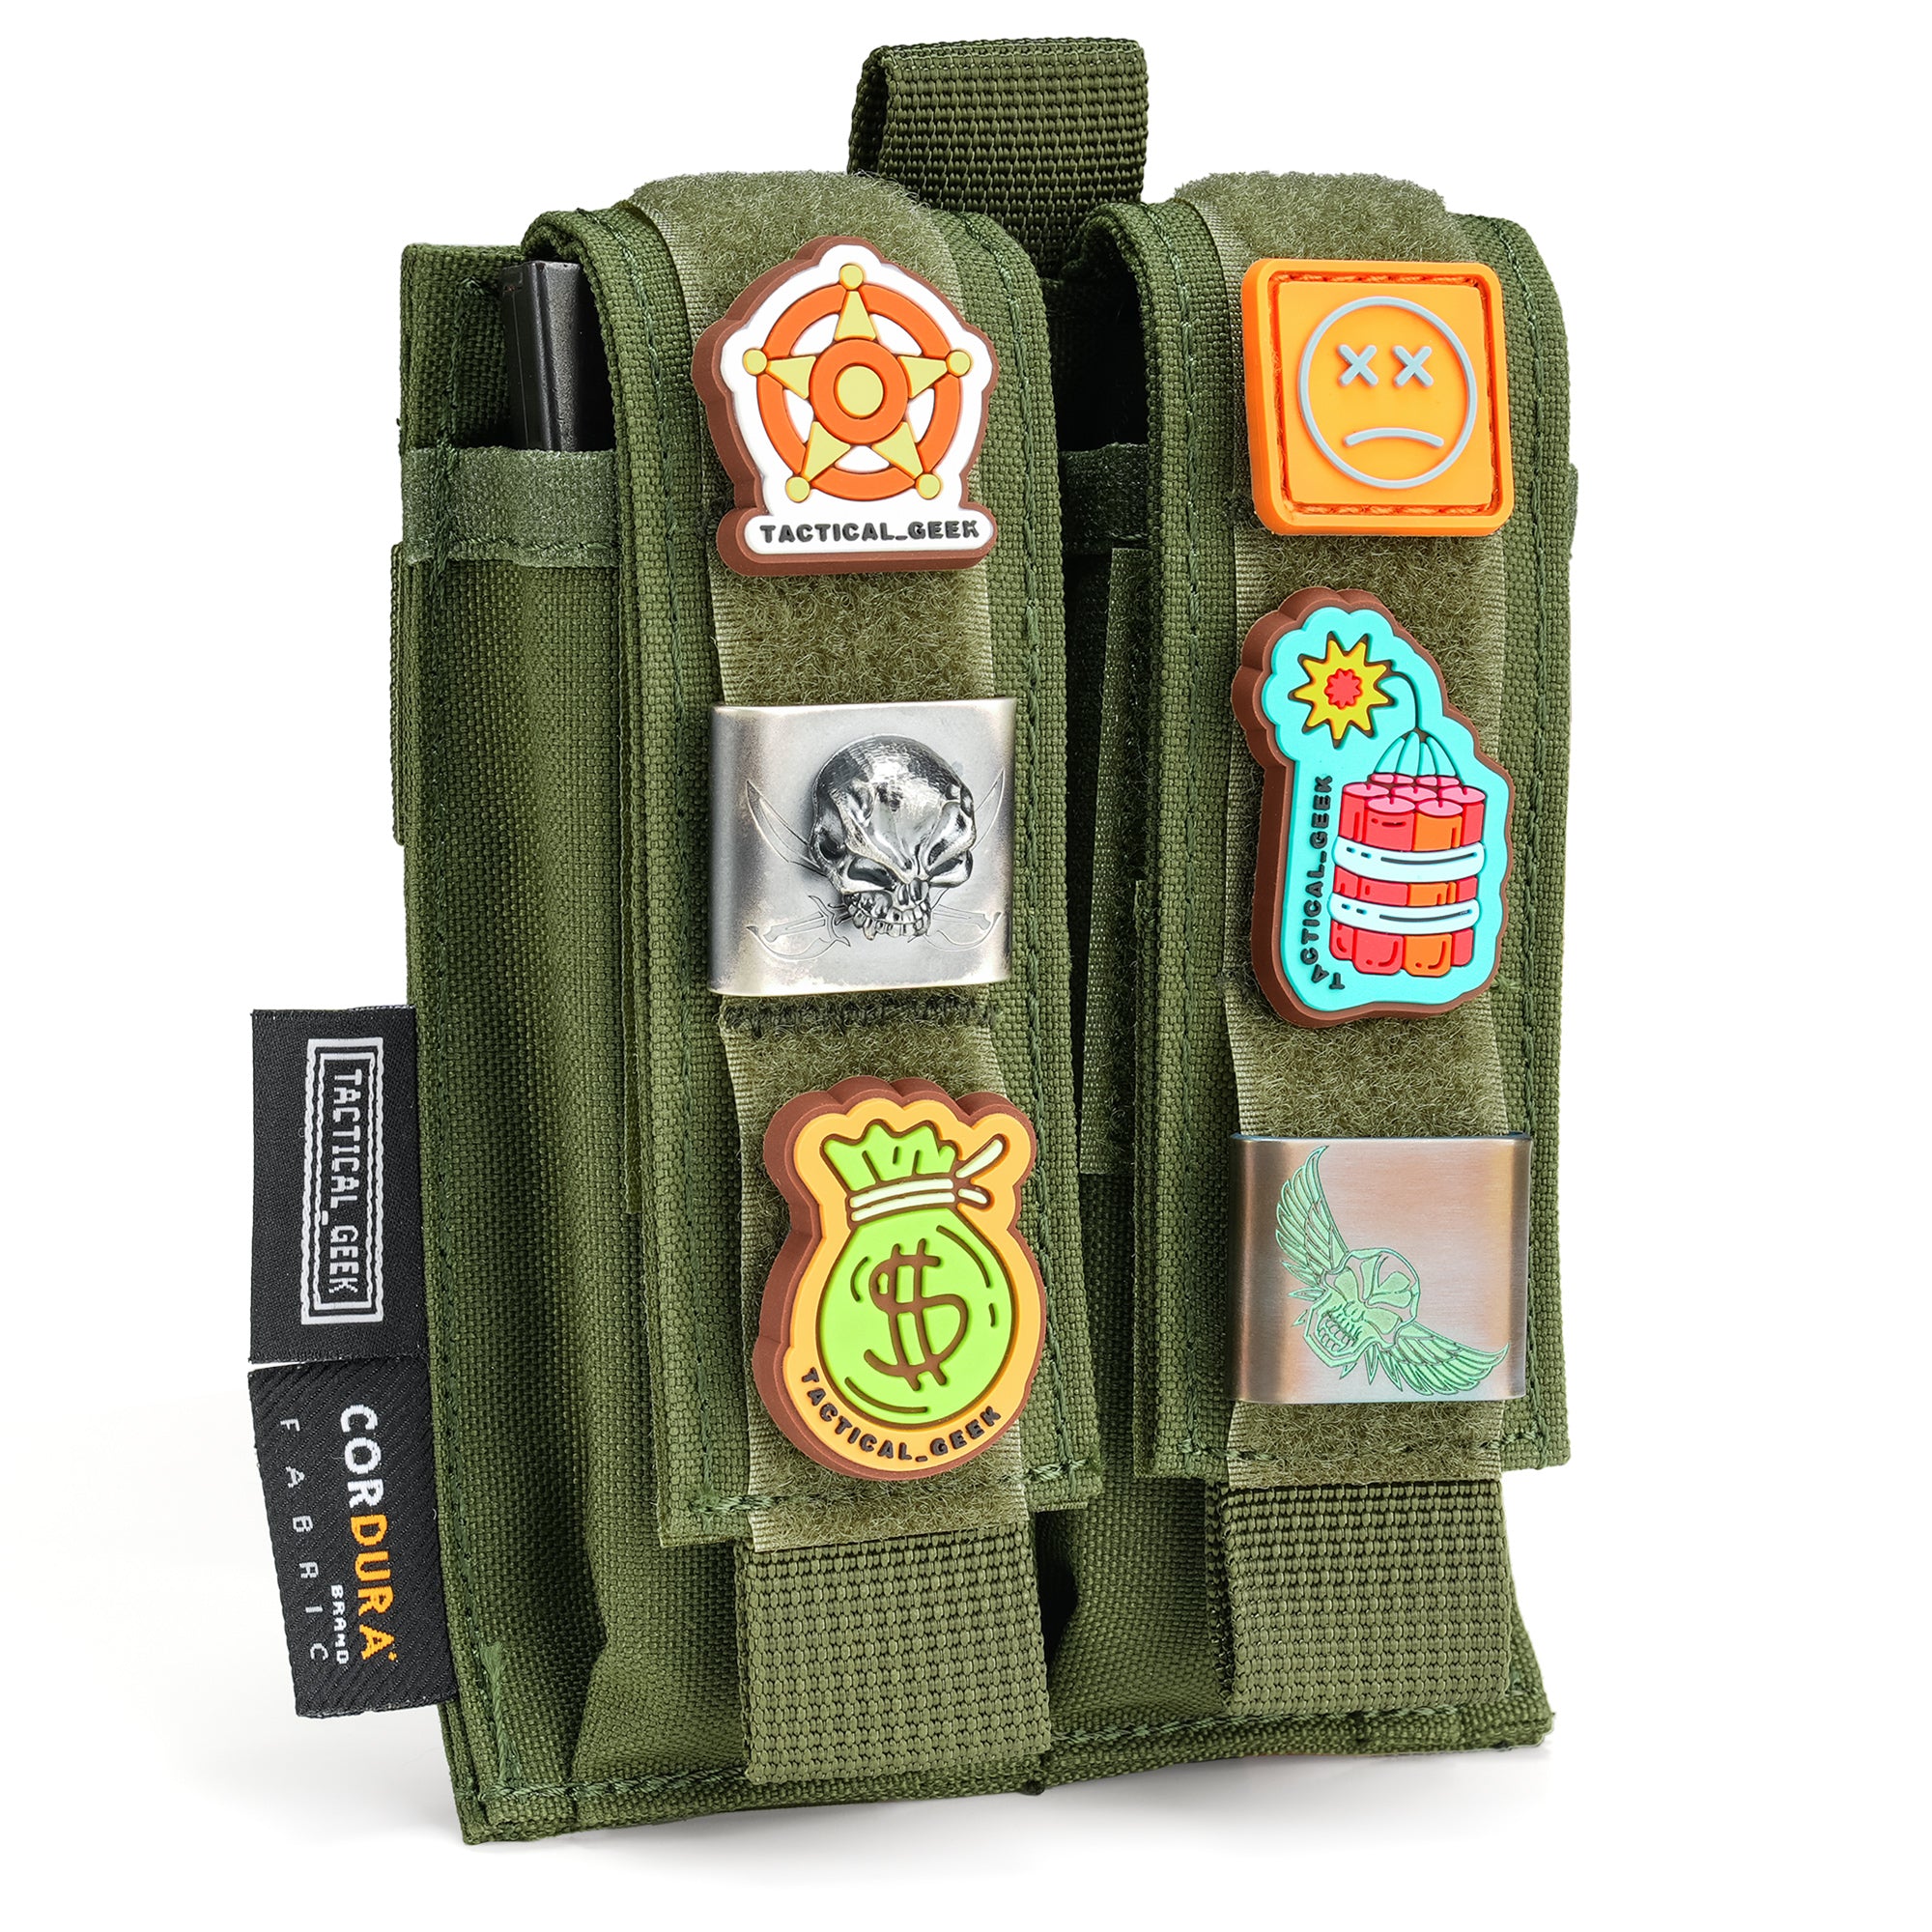 EXT9 Double Pistol Mag Pouch (GREEN)